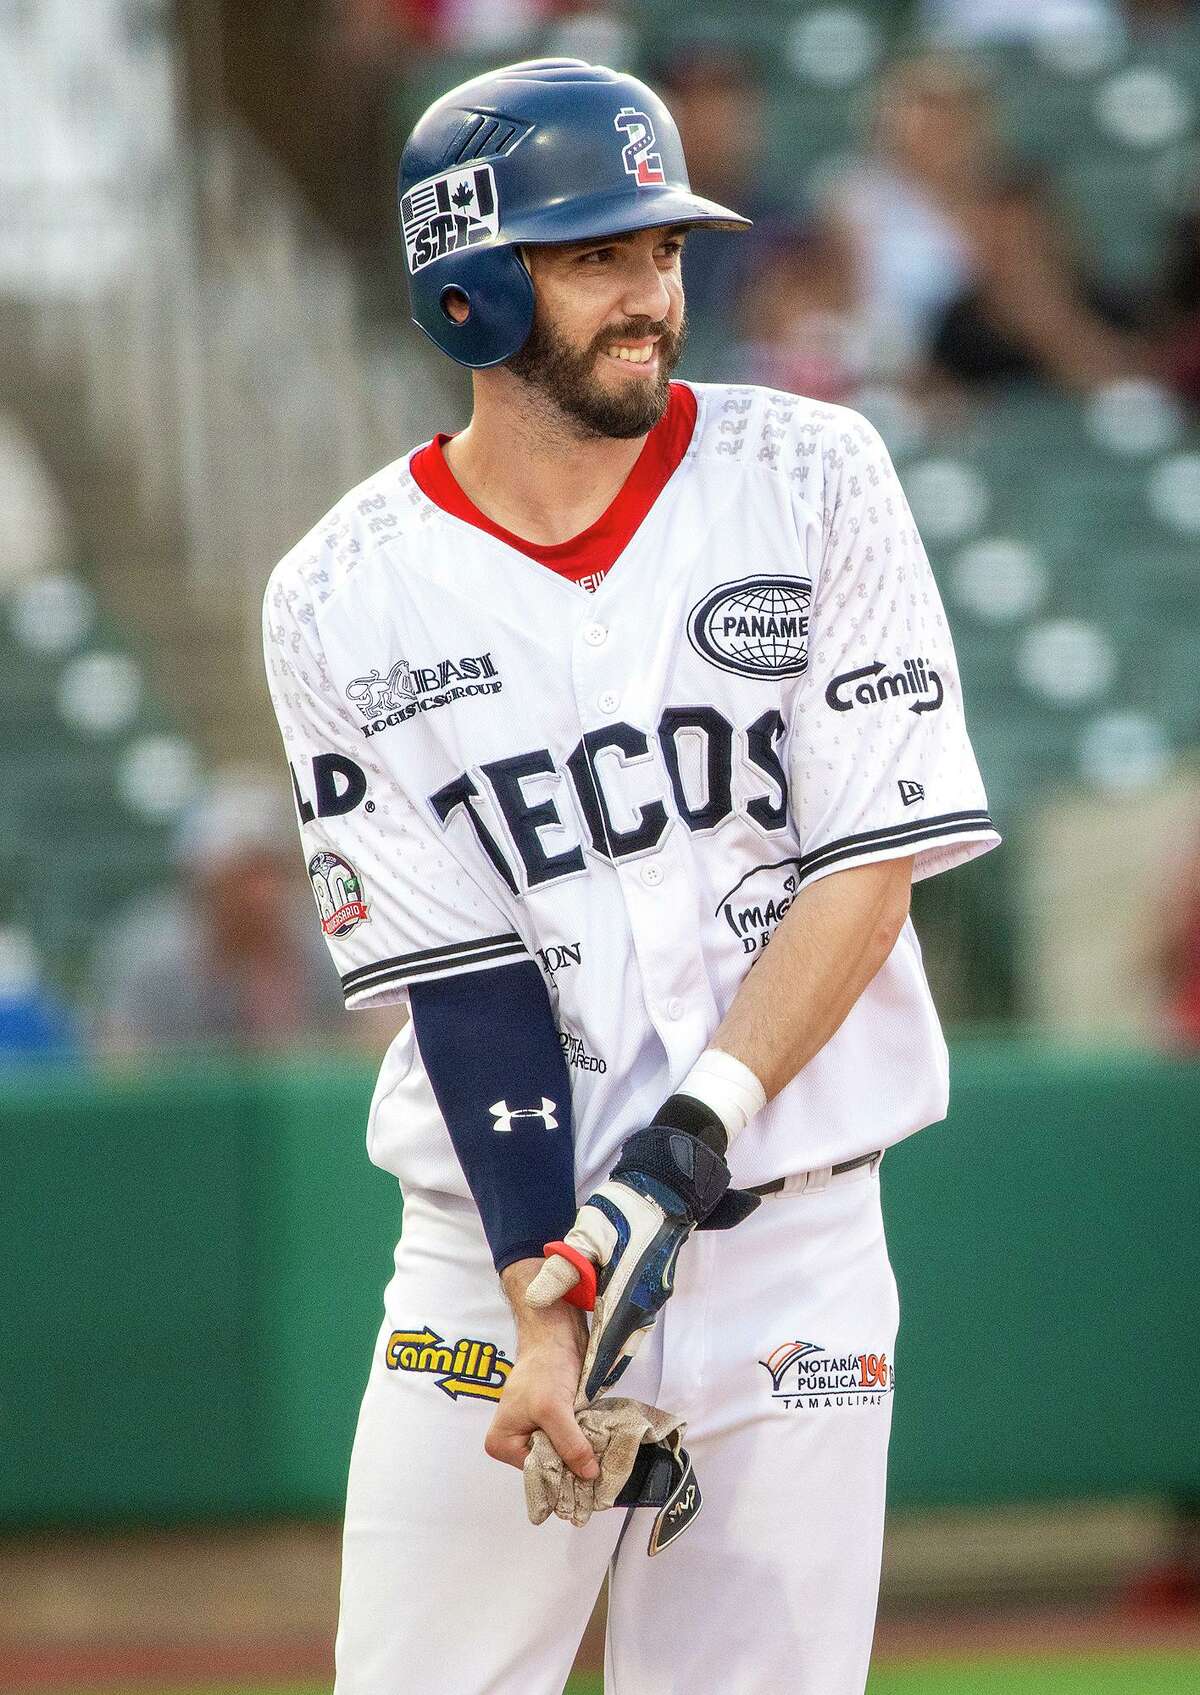 Since returning from injury, Kevin Medrano has manned center field for the Tecolotes Dos Laredos.